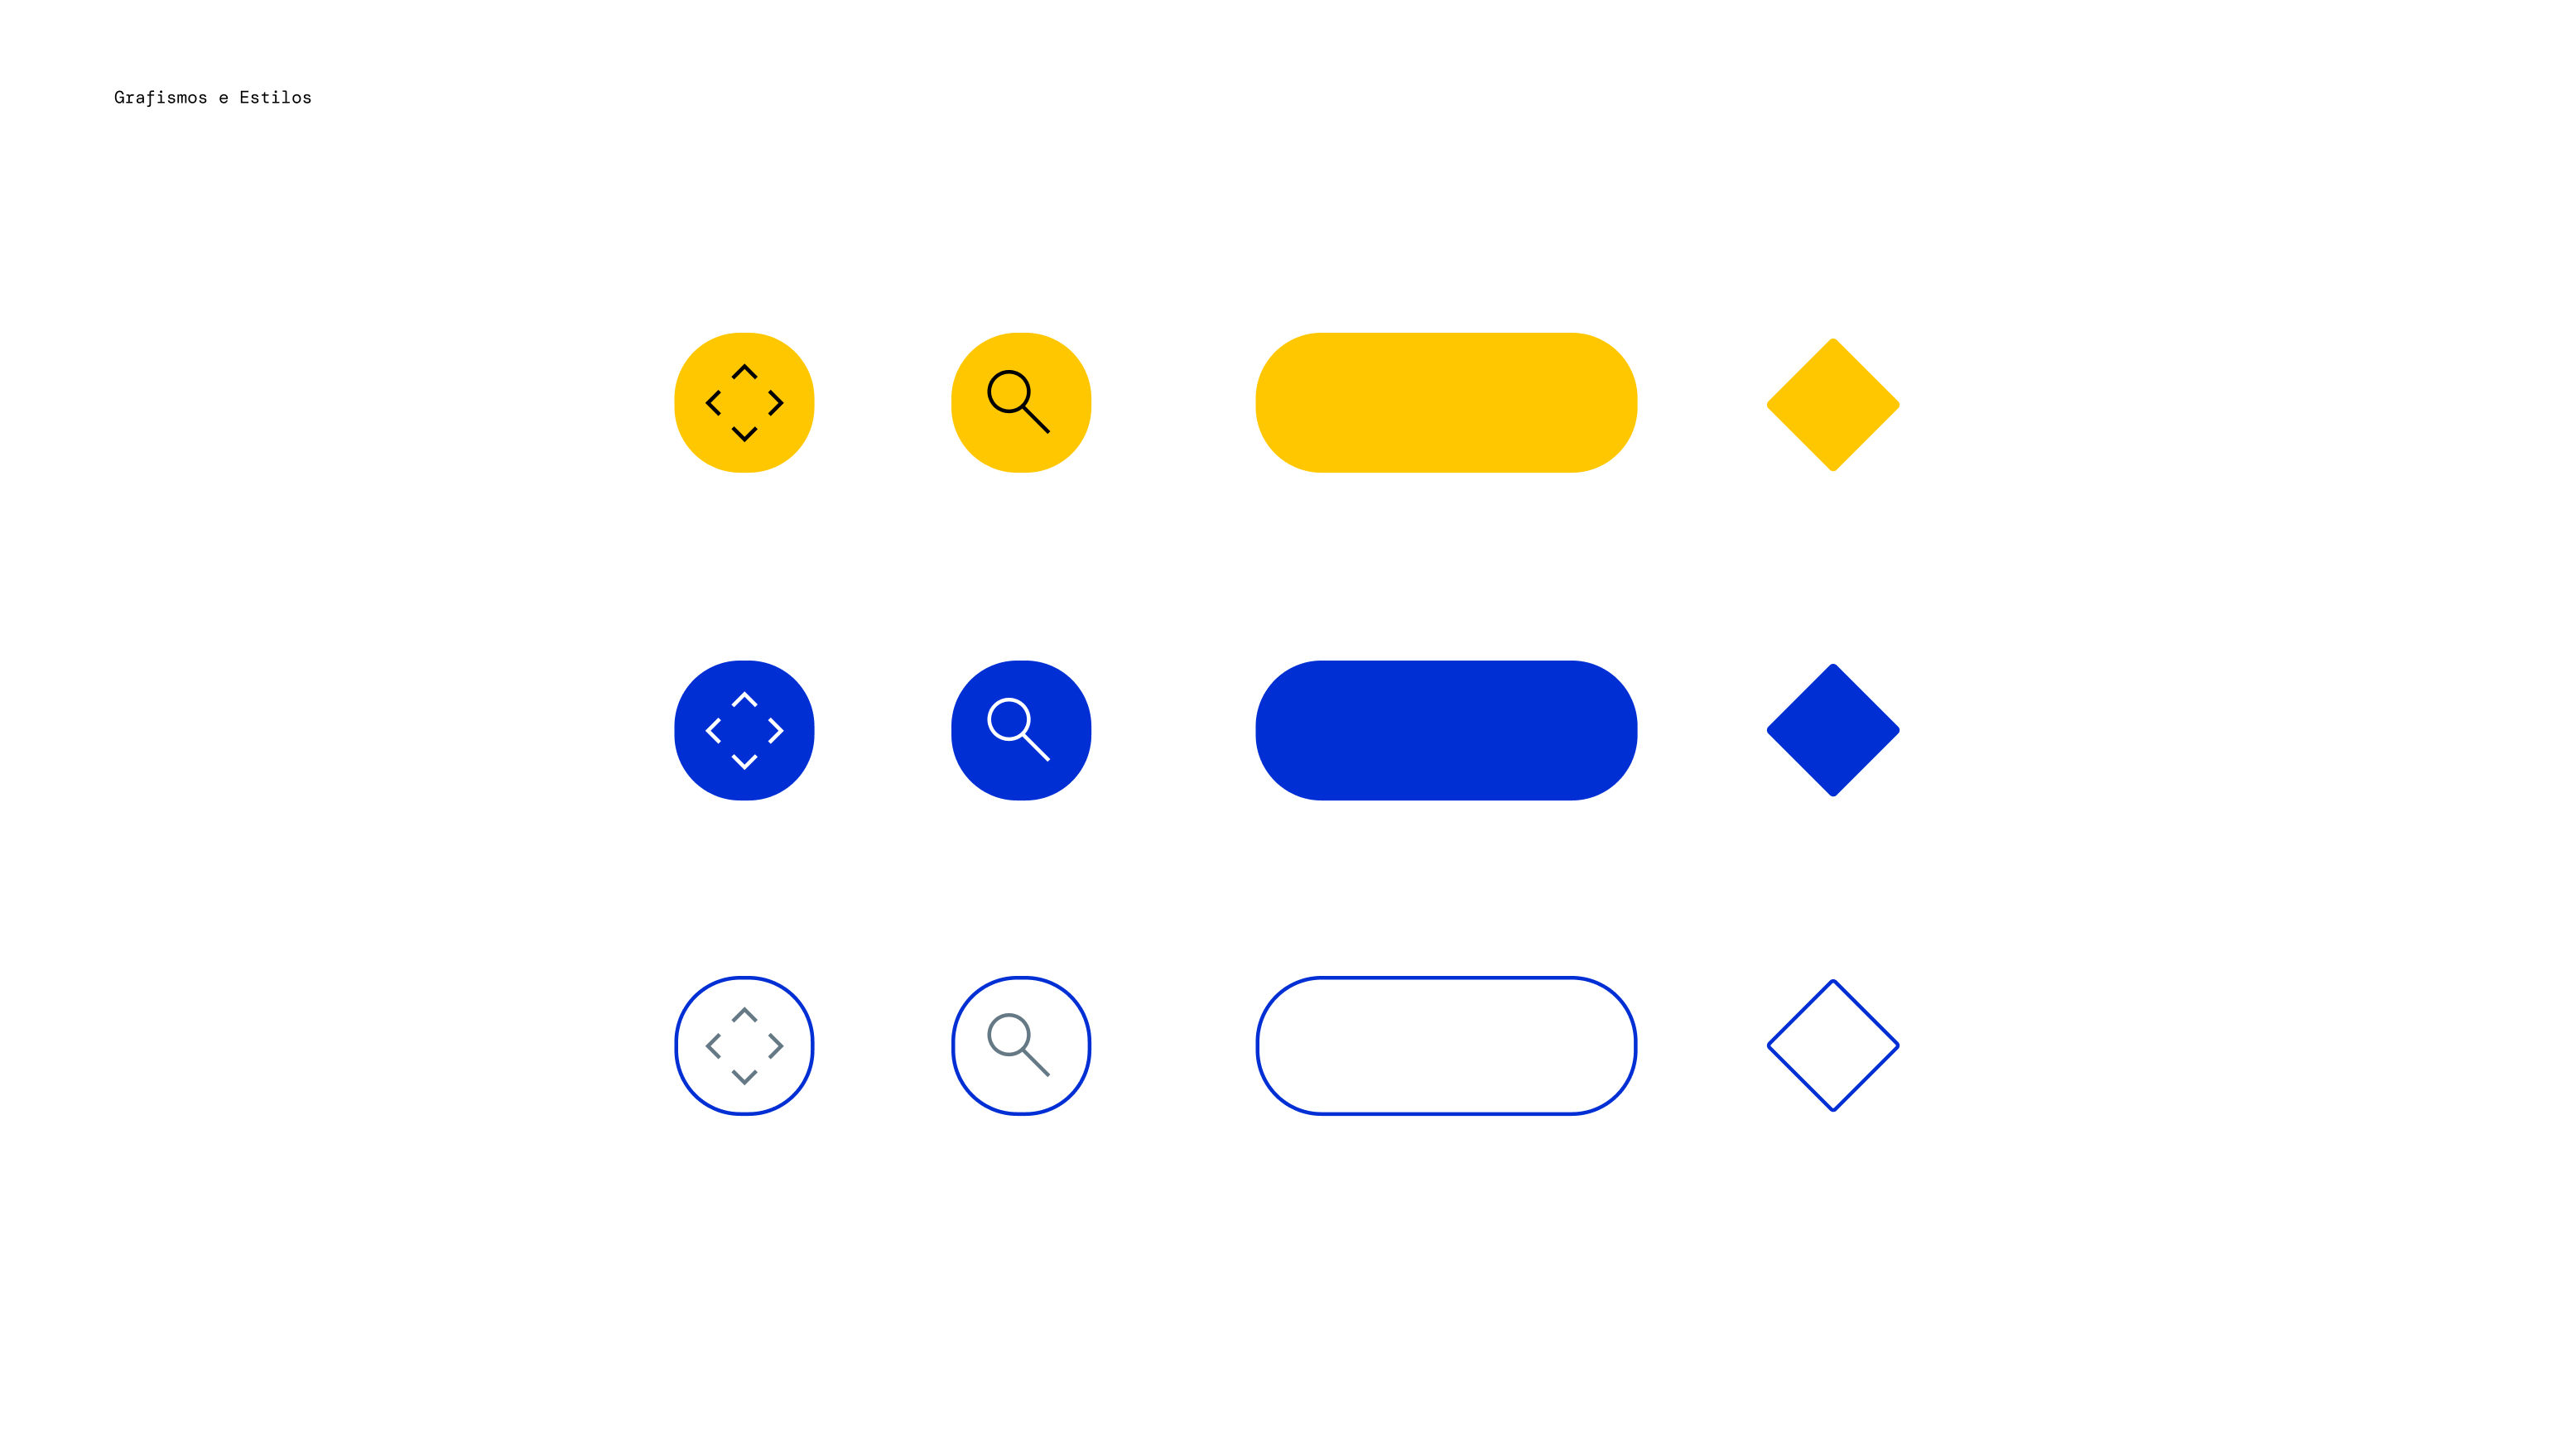 UI elements for Sunny Systems in white, bright blue and yellow.